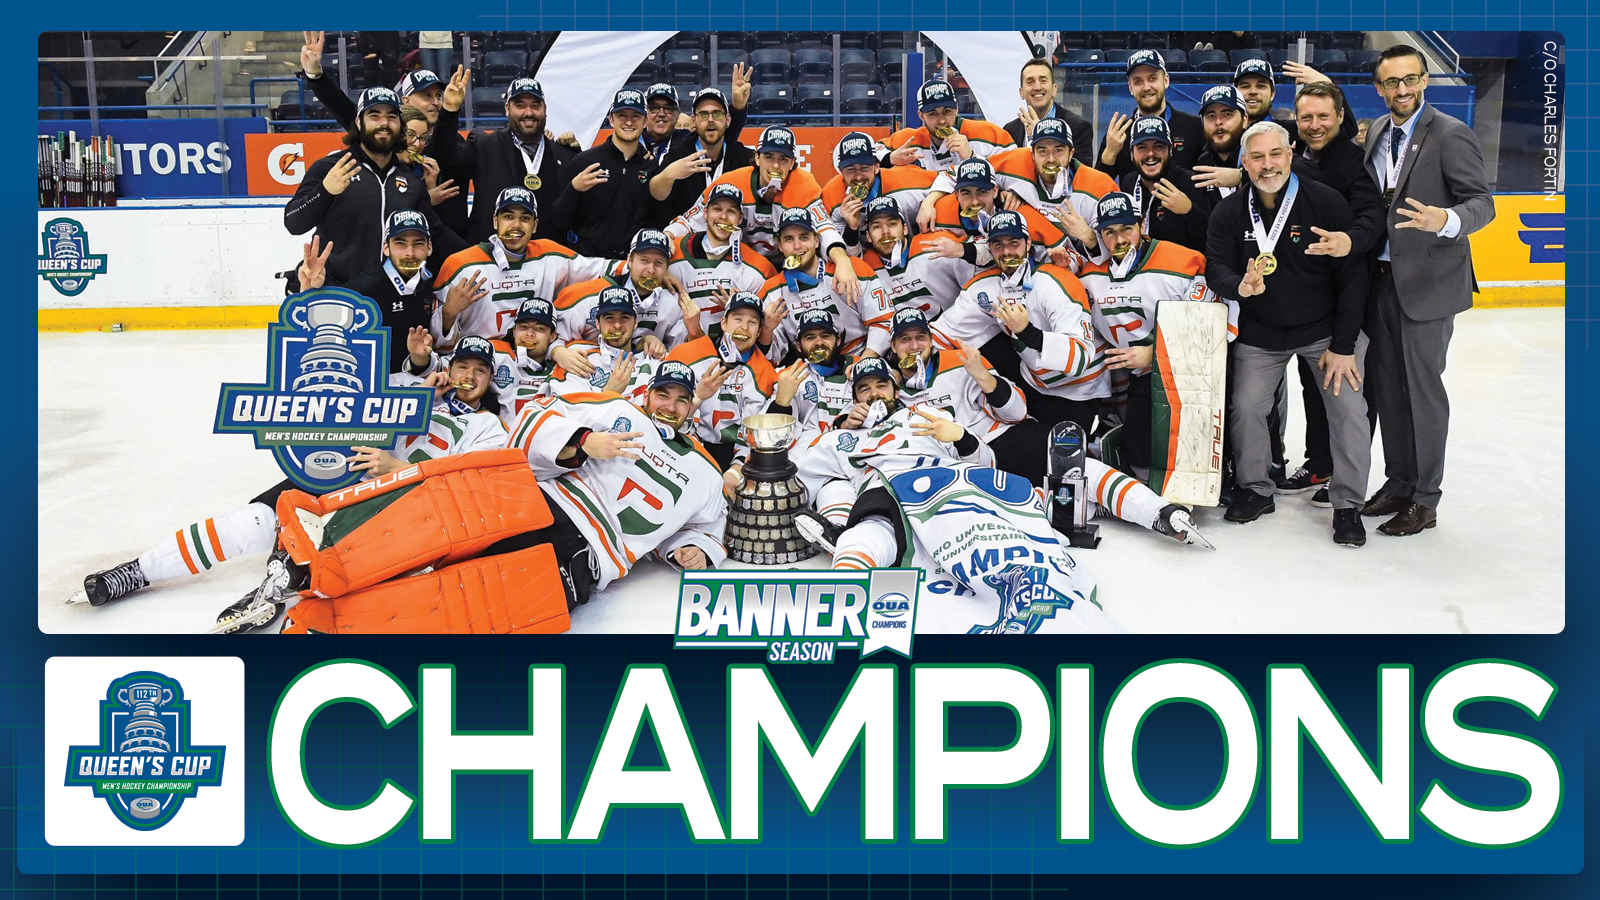 Graphic on blue background featuring banner photo of UQTR men's hockey team, with large white text below that reads, 'CHAMPIONS' and the Queen's Cup Championship logo